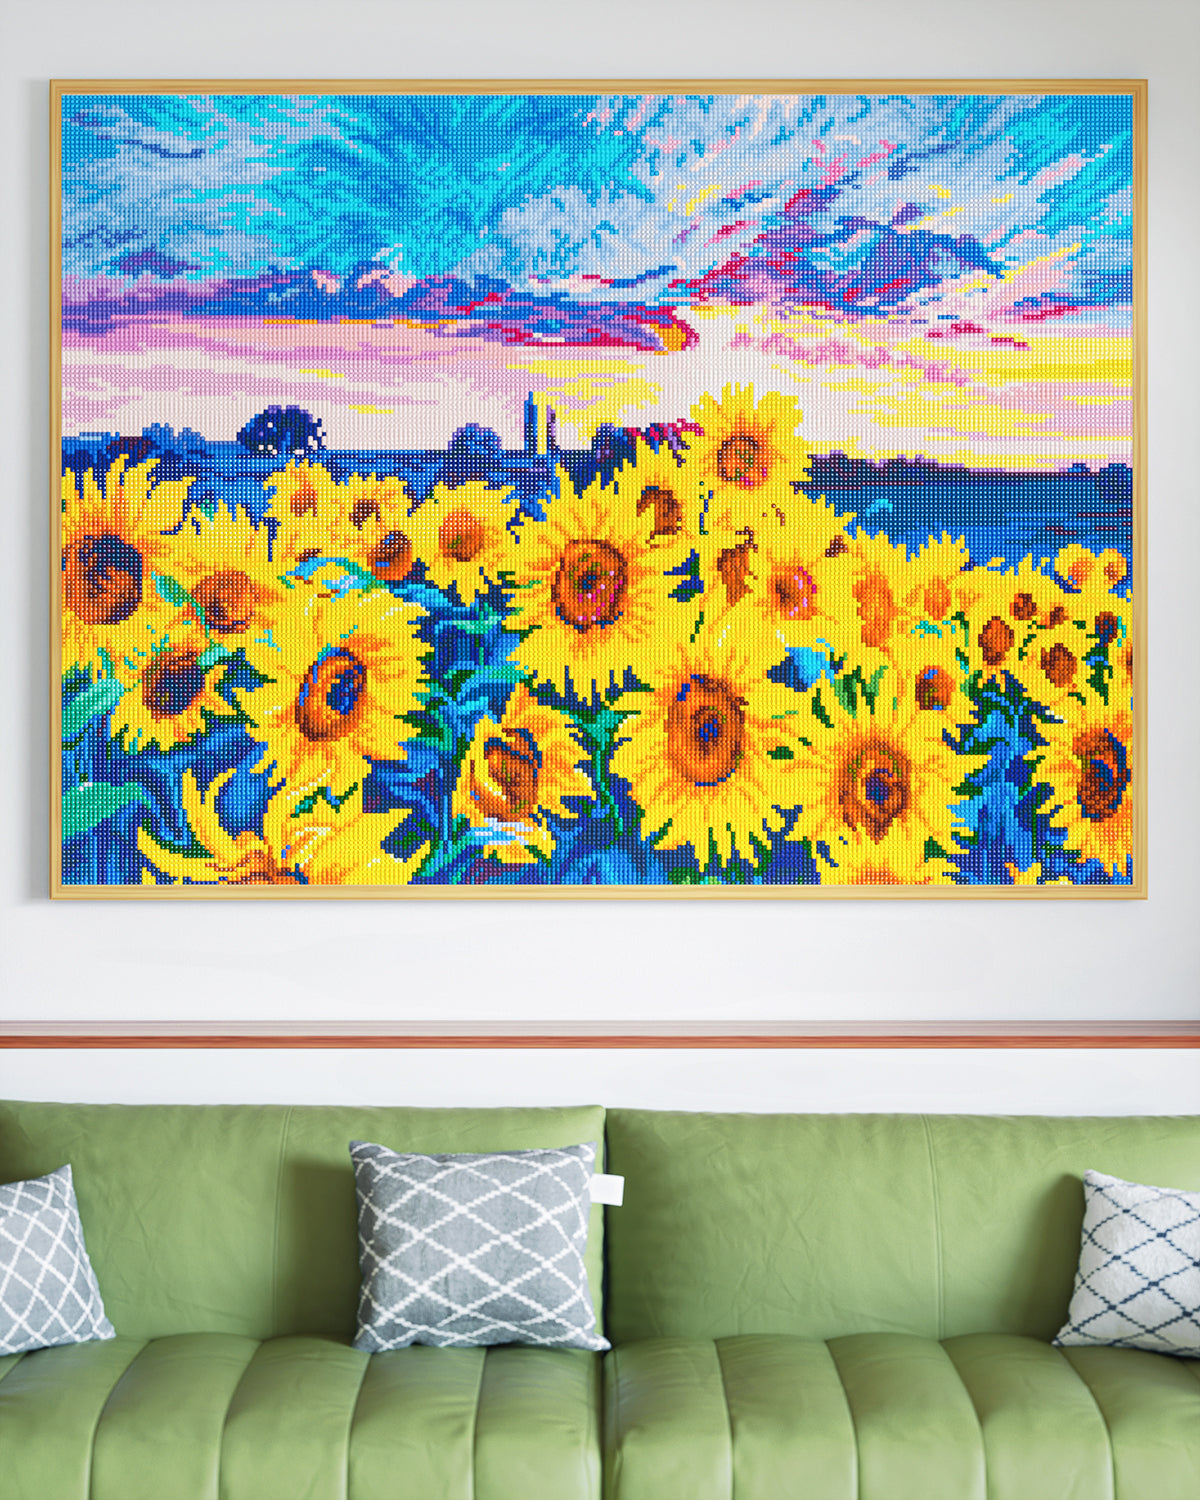 Display the sunflower diamond painting in the live room